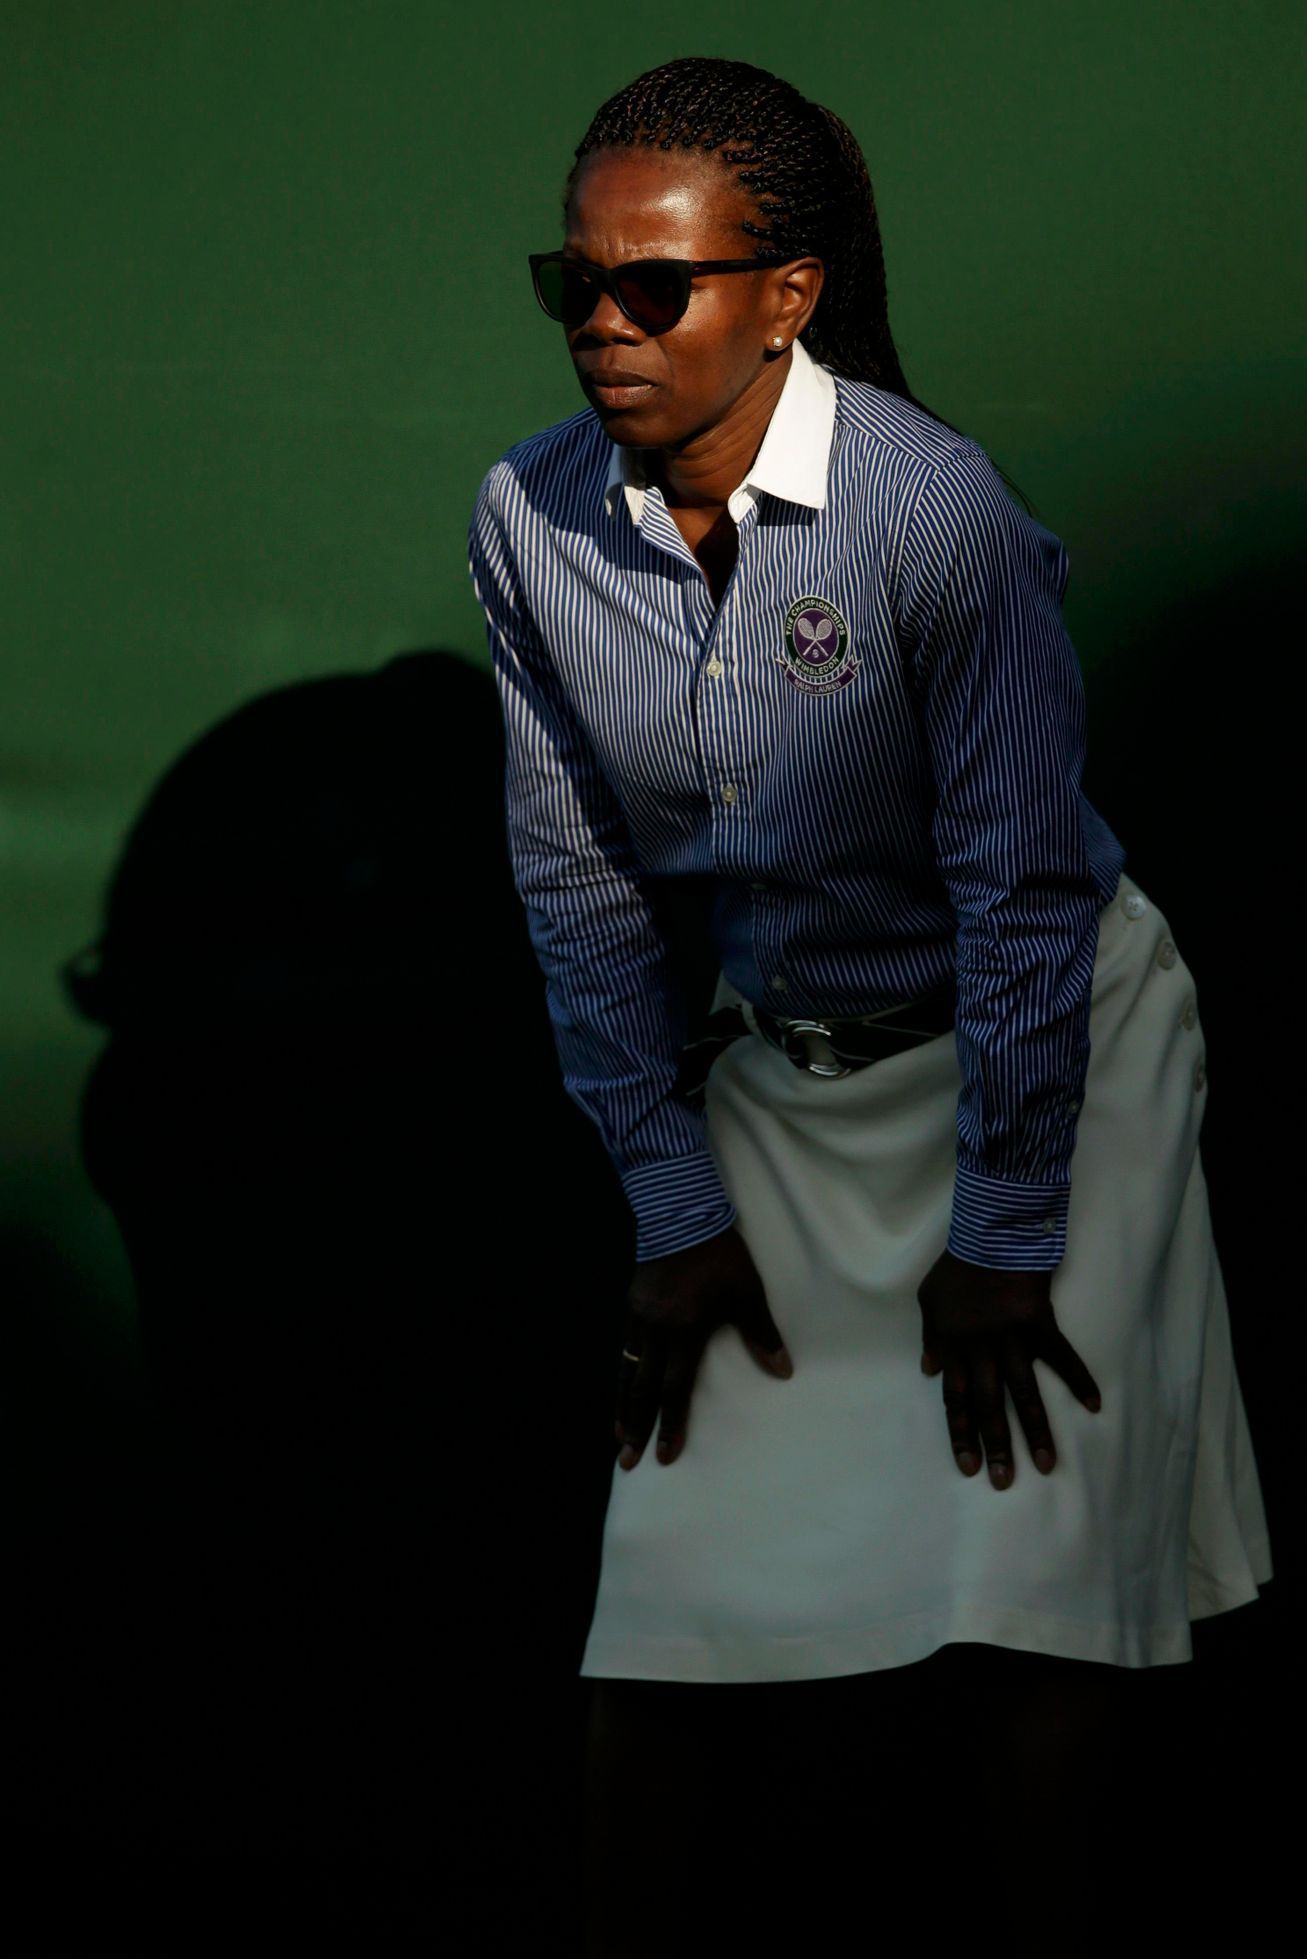 A Line judge casts a shadow at the Wimbledon Tennis Championships in London